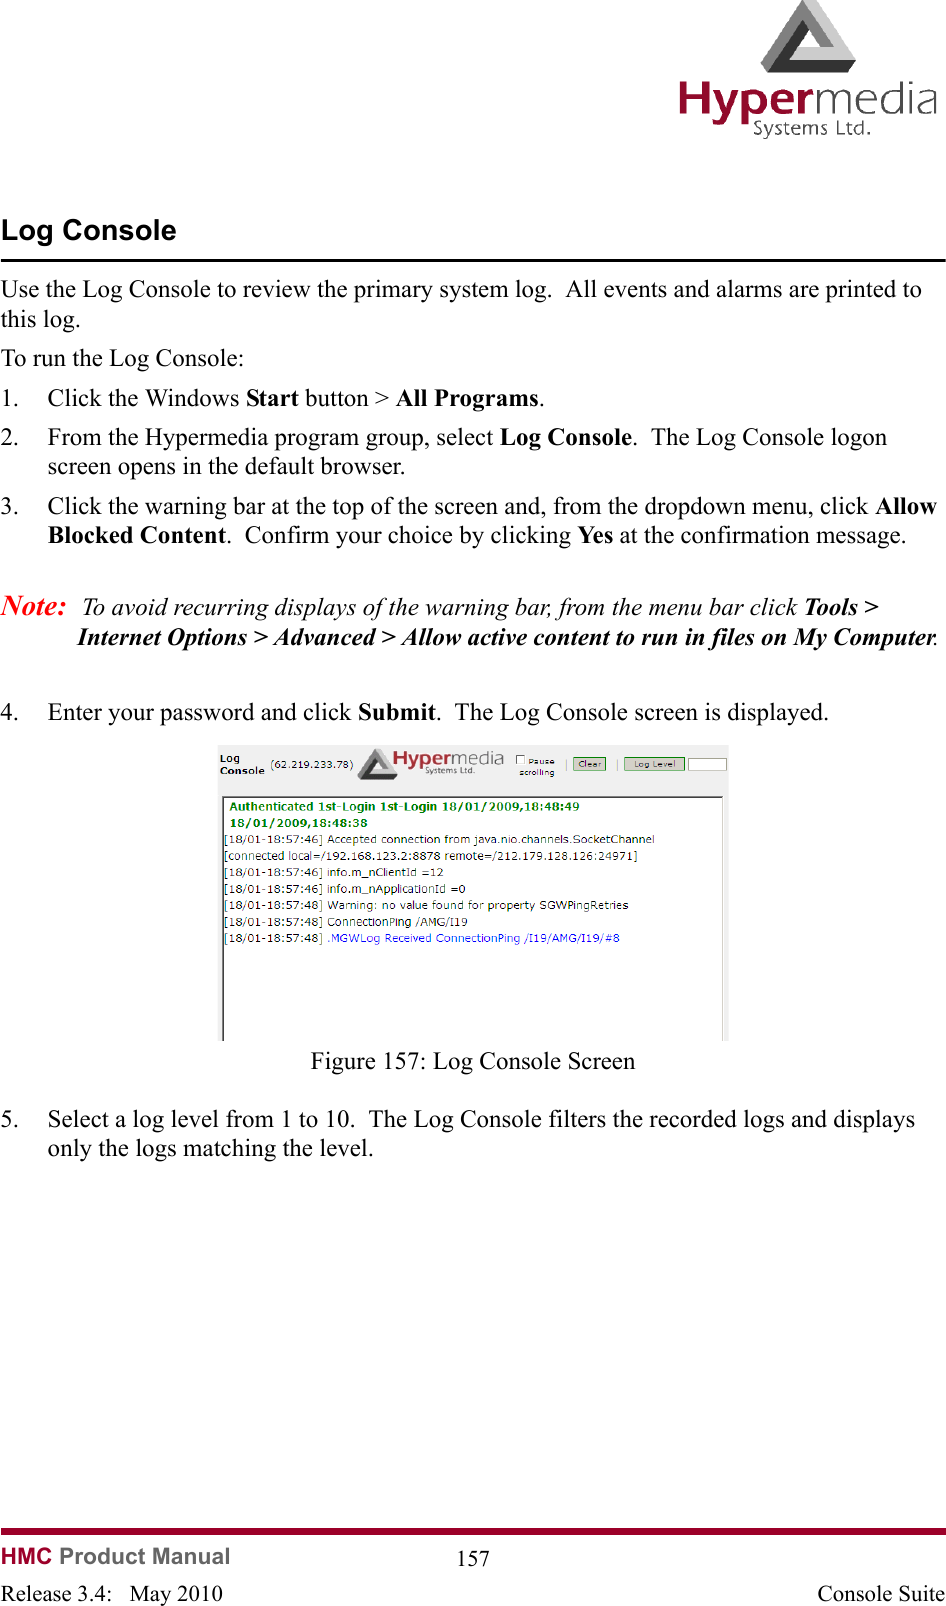 HMC Product Manual  157Release 3.4:   May 2010 Console SuiteLog ConsoleUse the Log Console to review the primary system log.  All events and alarms are printed to this log.To run the Log Console:1. Click the Windows Start button &gt; All Programs.2. From the Hypermedia program group, select Log Console.  The Log Console logon screen opens in the default browser.3. Click the warning bar at the top of the screen and, from the dropdown menu, click Allow Blocked Content.  Confirm your choice by clicking Ye s  at the confirmation message.Note:  To avoid recurring displays of the warning bar, from the menu bar click Tools &gt; Internet Options &gt; Advanced &gt; Allow active content to run in files on My Computer. 4. Enter your password and click Submit.  The Log Console screen is displayed.              Figure 157: Log Console Screen5. Select a log level from 1 to 10.  The Log Console filters the recorded logs and displays only the logs matching the level.